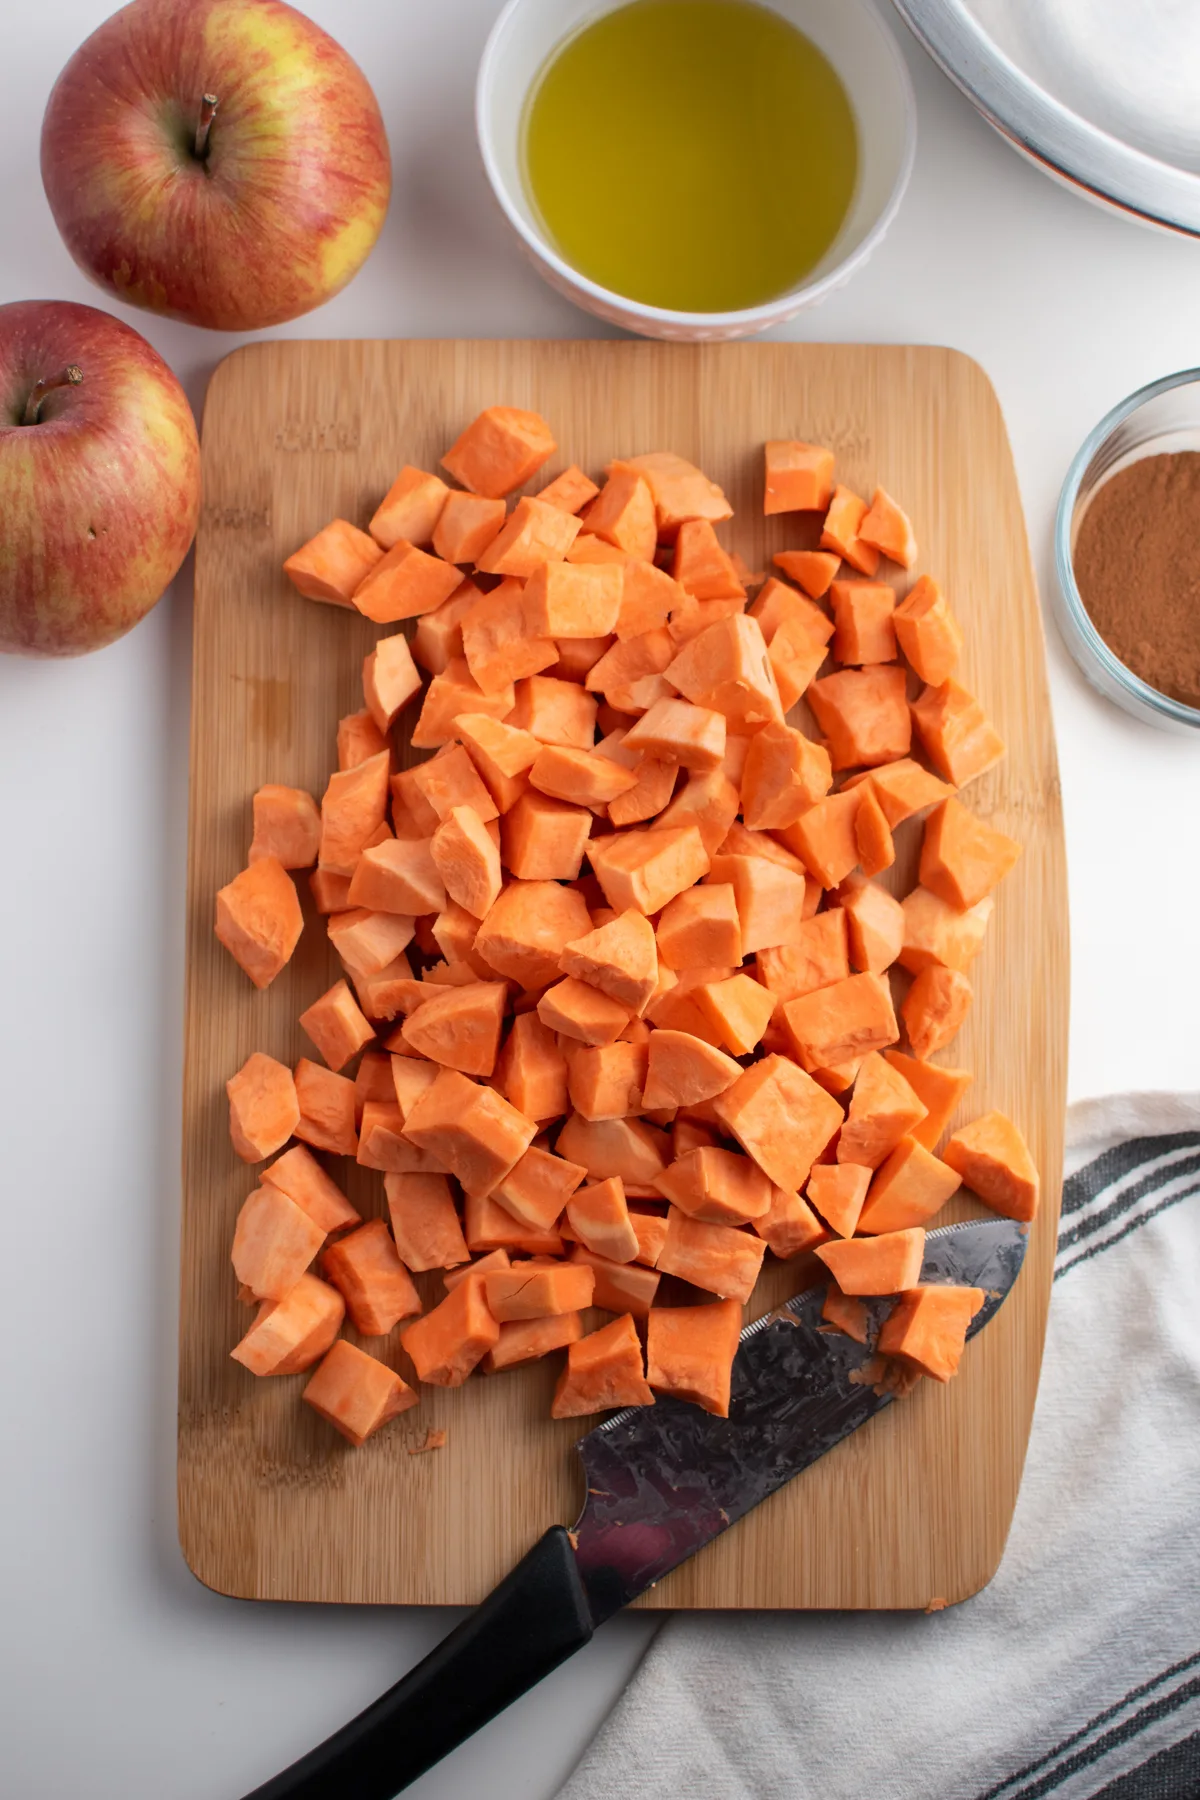 Chopped sweet potato cubes on a cutting board surrounded by knife, apples and bowls of ingredients.